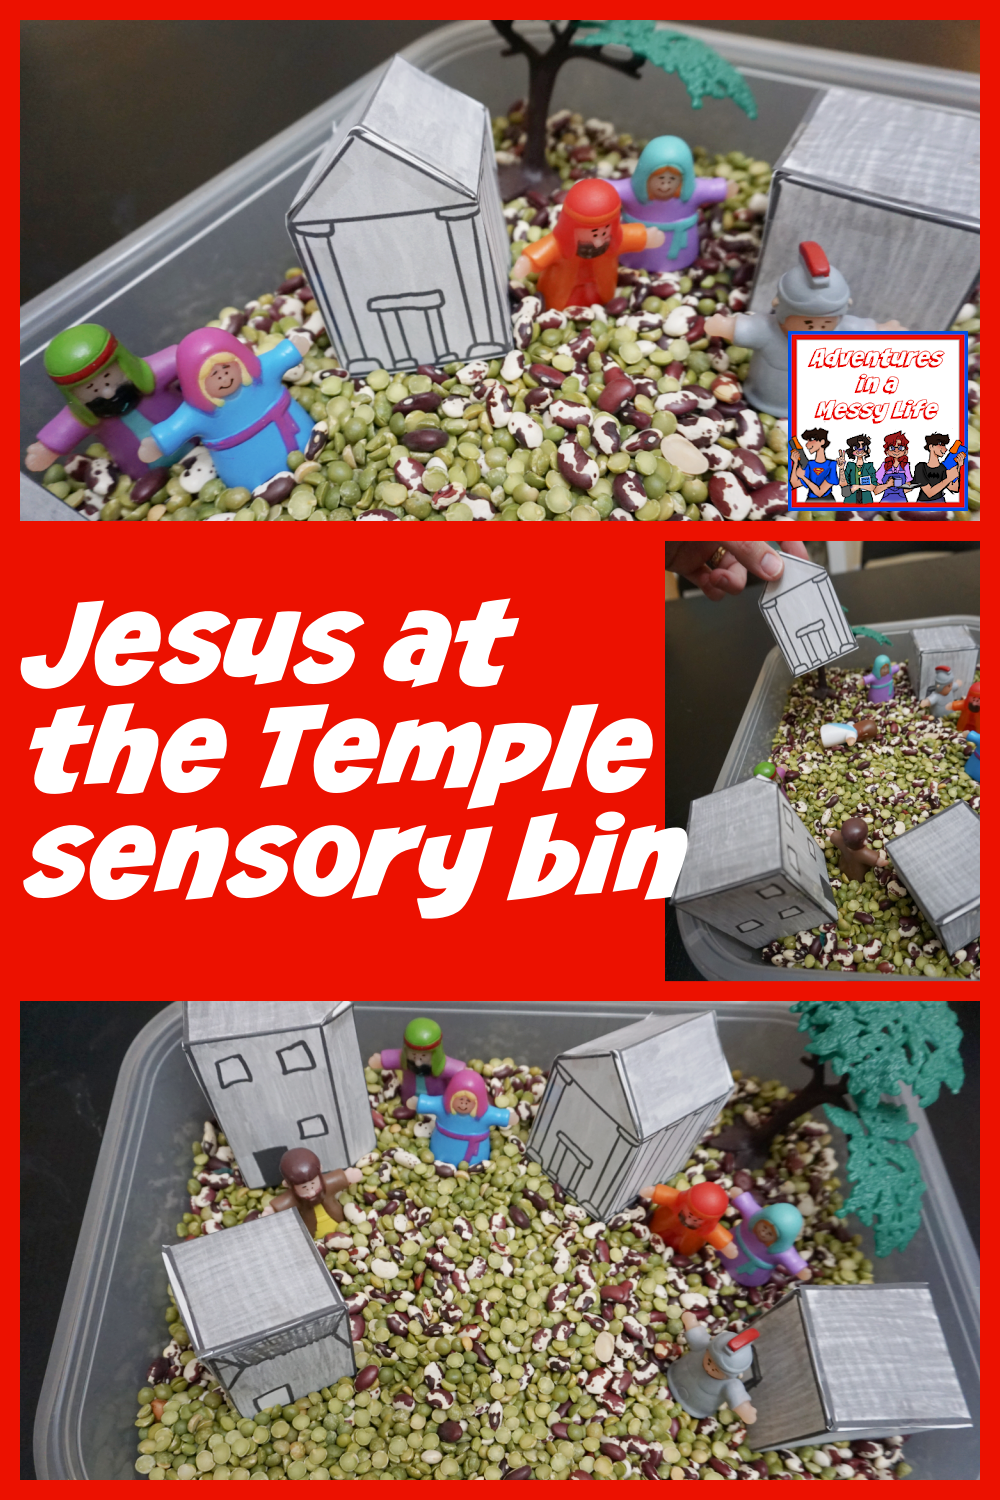 Jesus at the temple sensory bin for Bible lessons